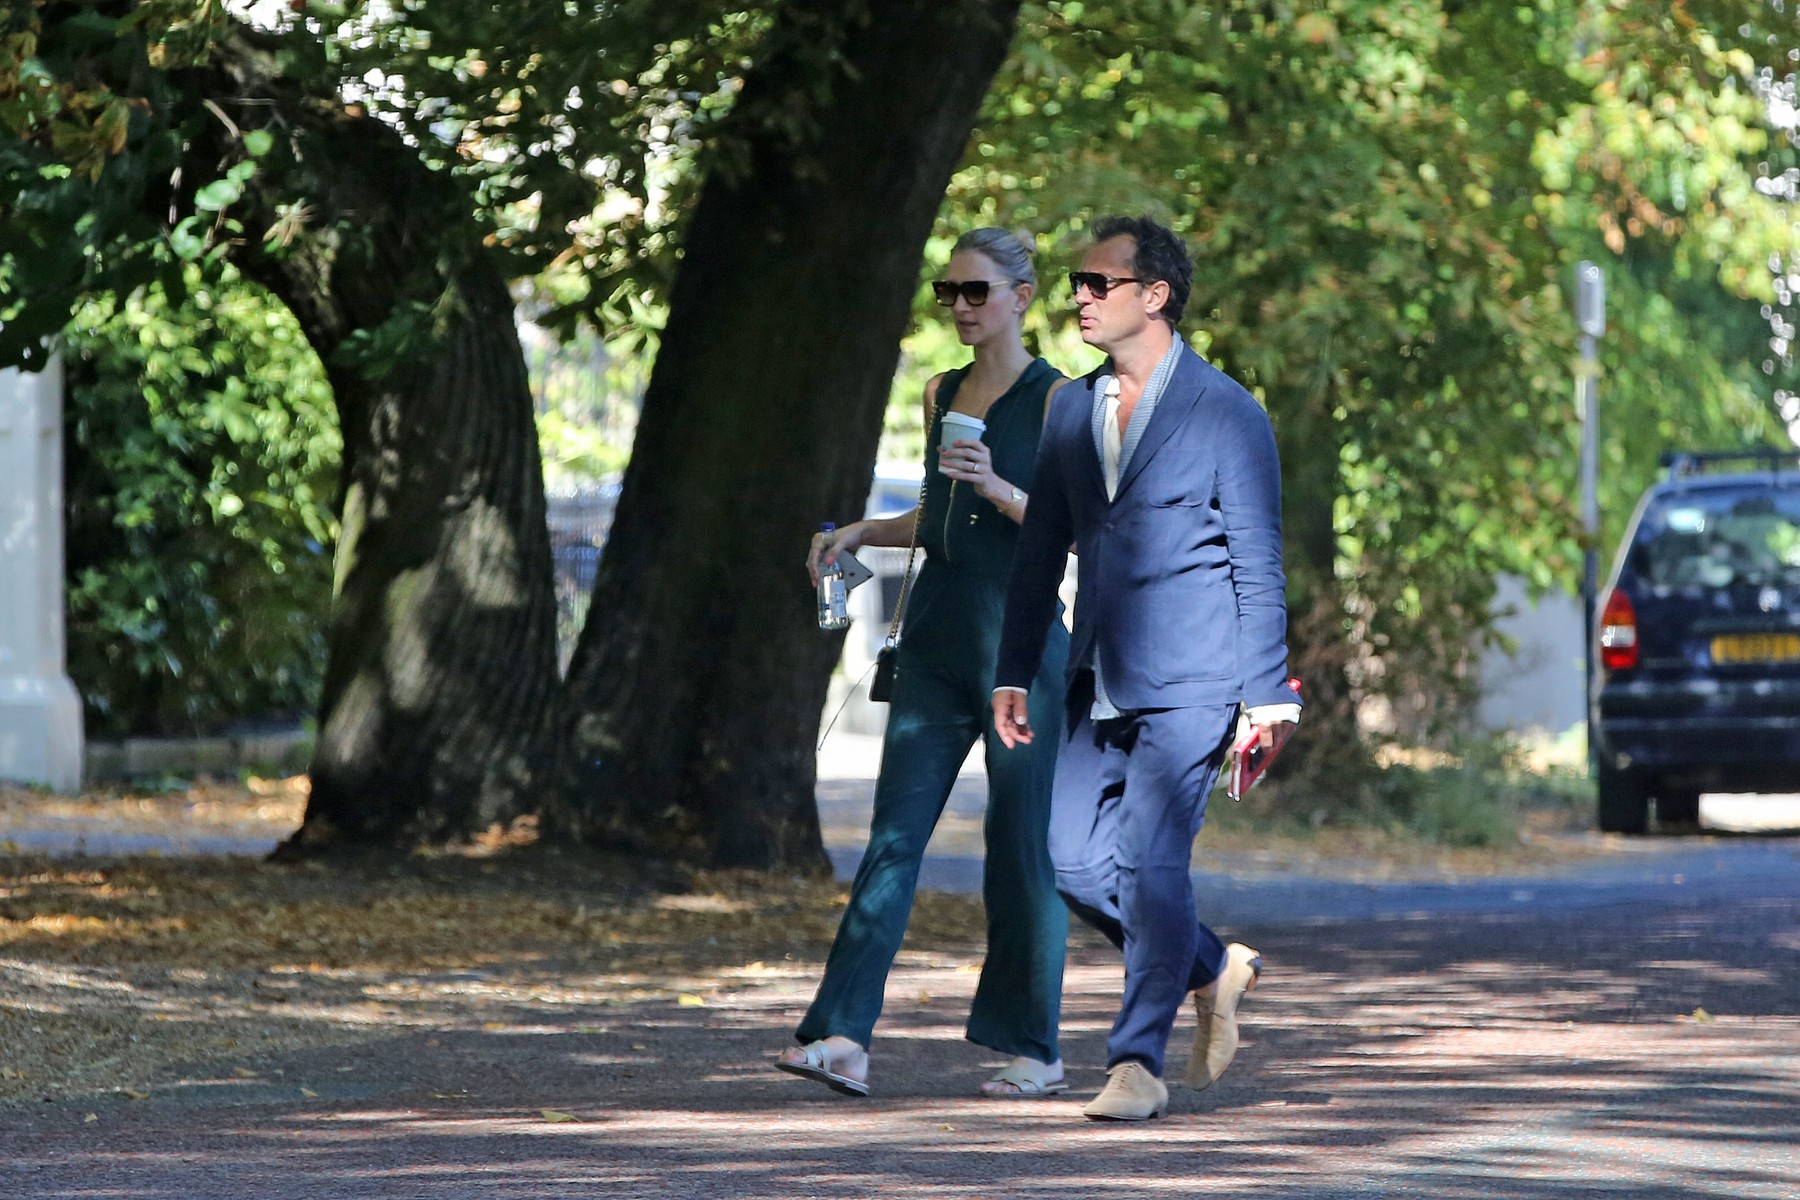 EXCLUSIVE: Jude Law looks dapper in a navy suit as he joins his typically chic wife Phillipa Coan during a stroll in London
The actor, 46, looked dapper in a navy suit as he strolled along, carrying a copy of Carol Ann Duffy's Armistice: A Laureate's Choice of Poems of War and Peace.
21 Sep 2019, Image: 472260822, License: Rights-managed, Restrictions: NO Australia, Germany, New Zealand, United Kingdom, Model Release: no, Credit line: MEGA / The Mega Agency / Profimedia